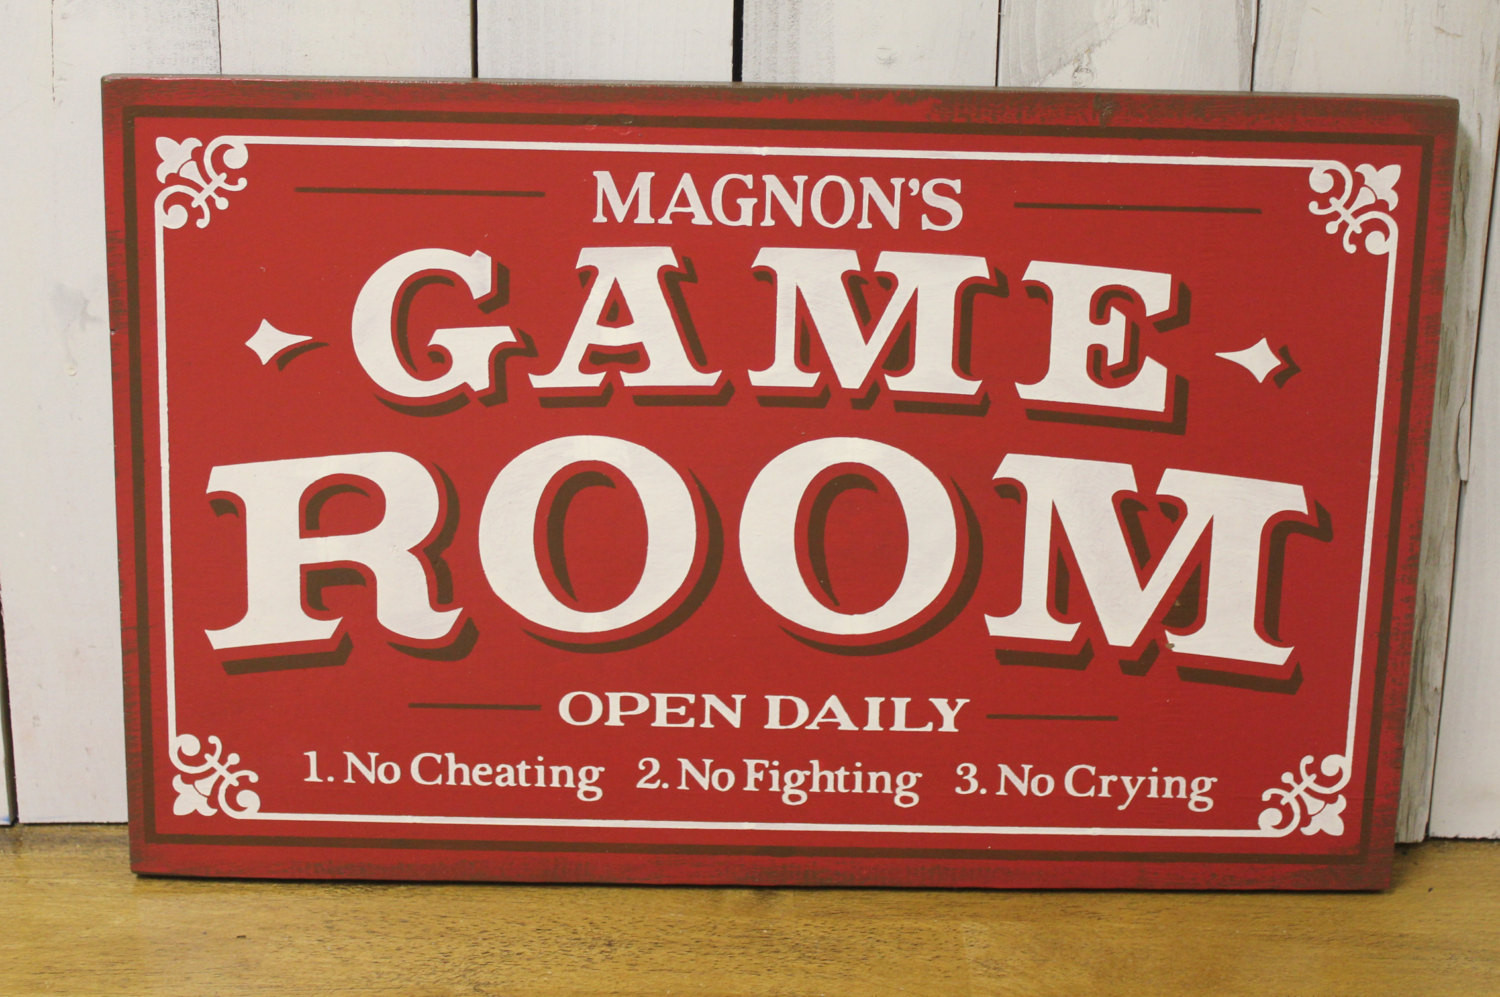 Man Cave Christmas Gifts
 Game Room Sign Personalized Man Cave Christmas Gift YOU choose